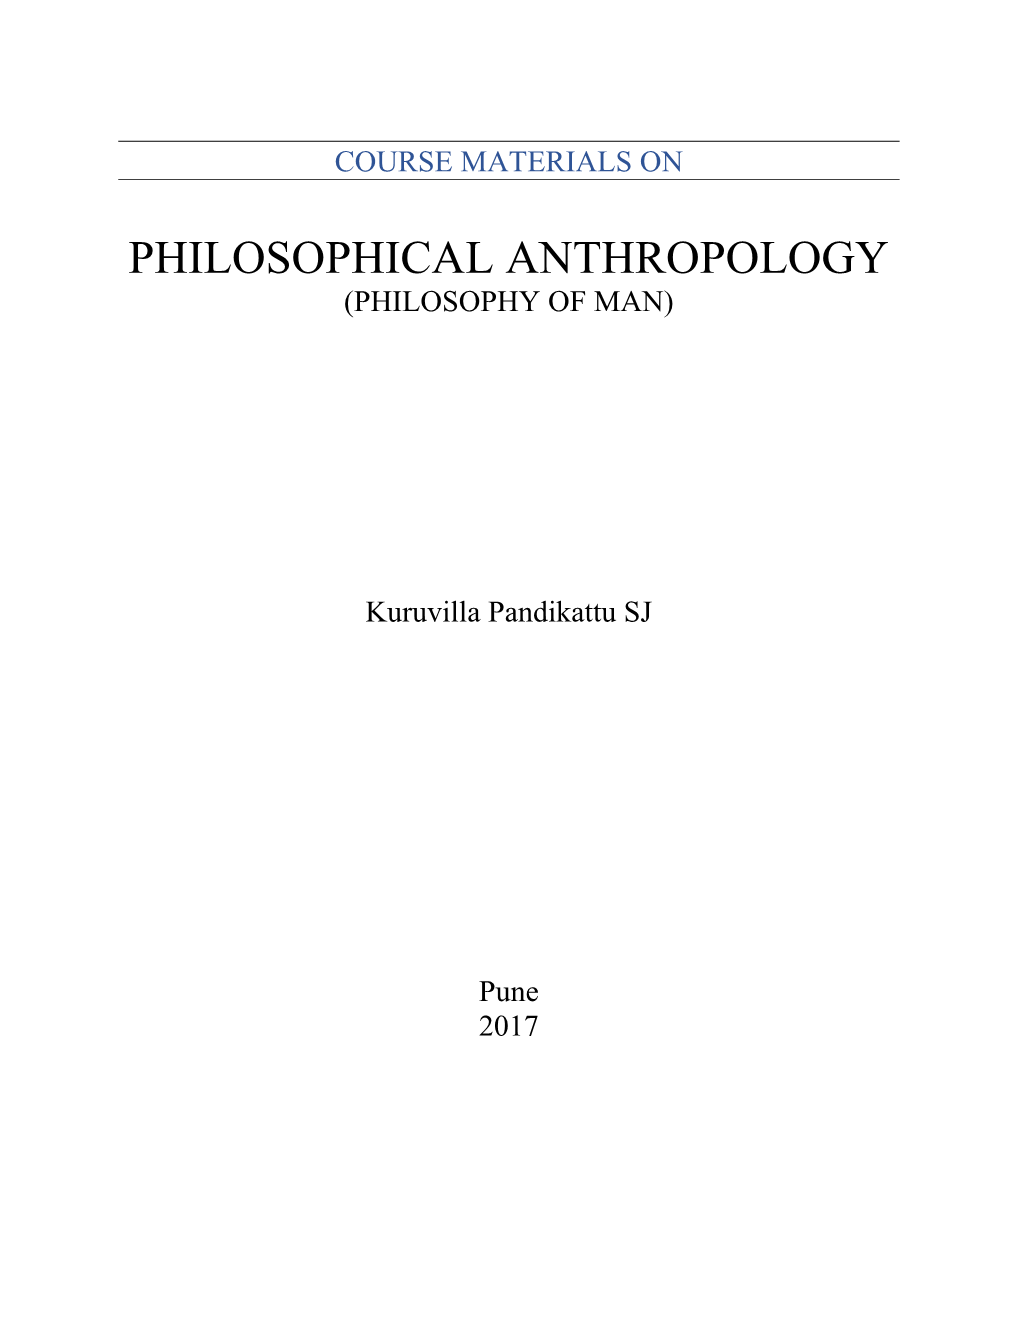 Philosophical Anthropology (Philosophy of Man)